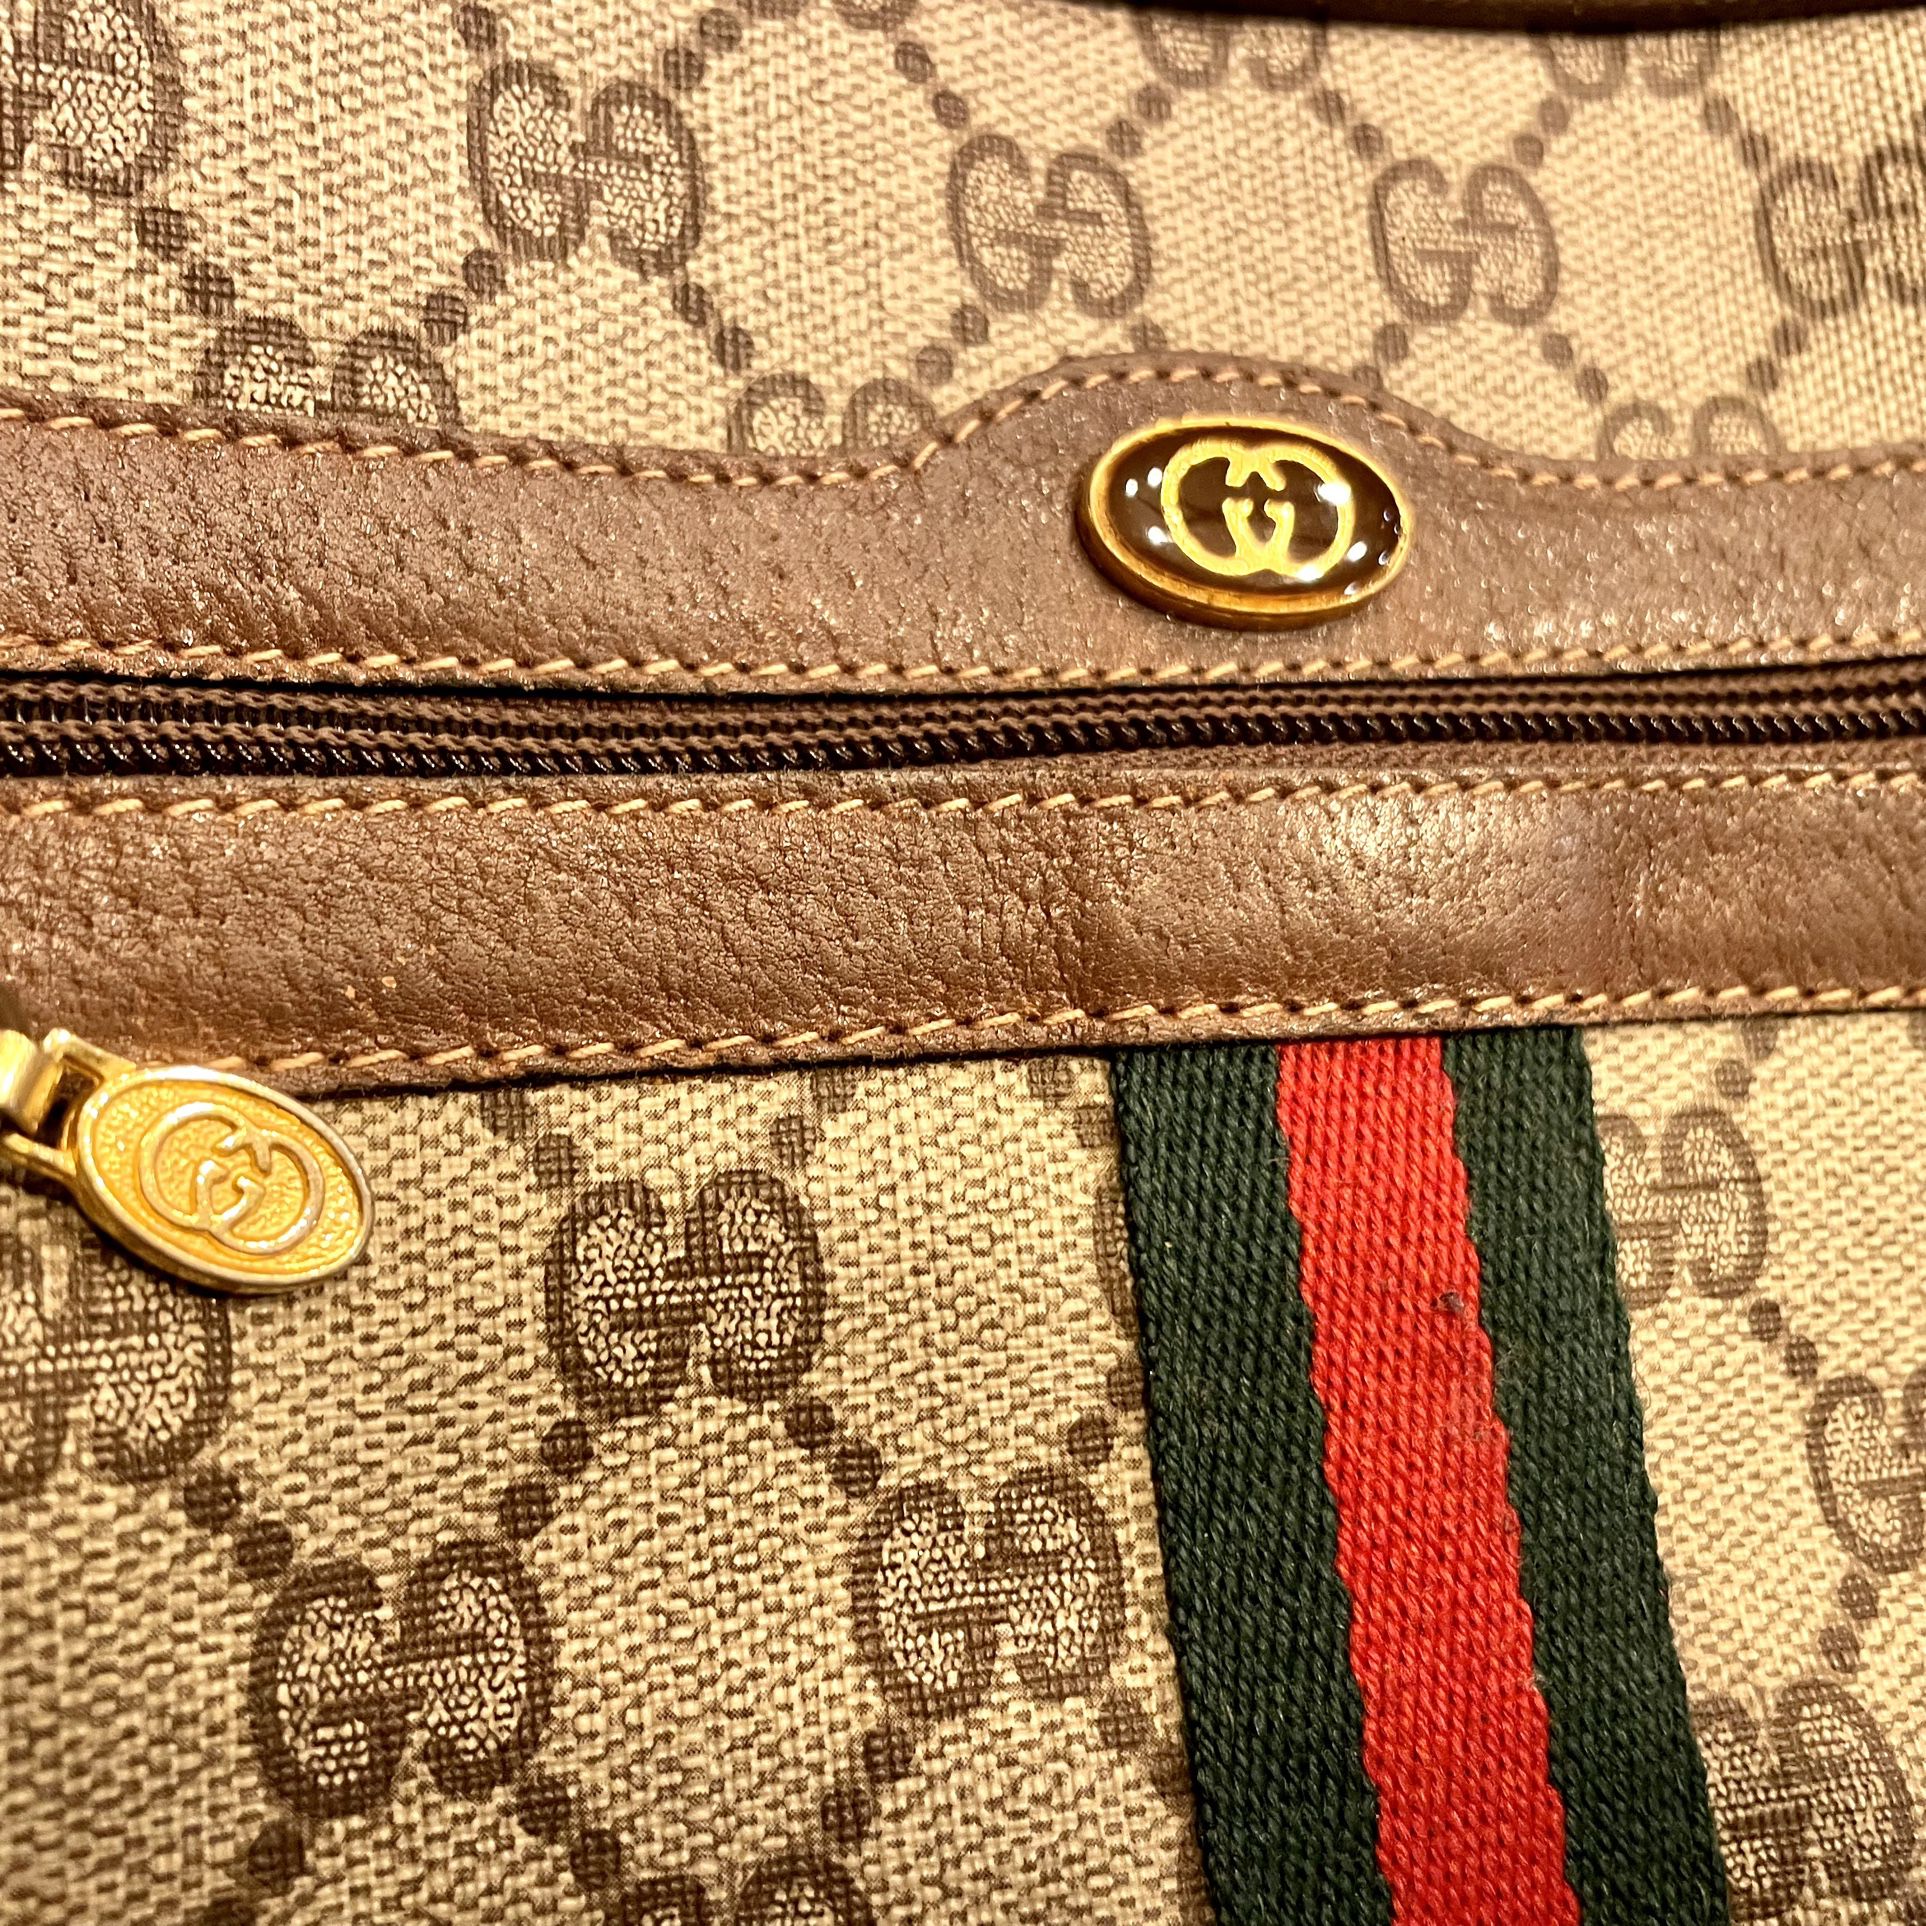 Gucci Supreme Ophidia Small Boston Bag for Sale in South San Francisco, CA  - OfferUp